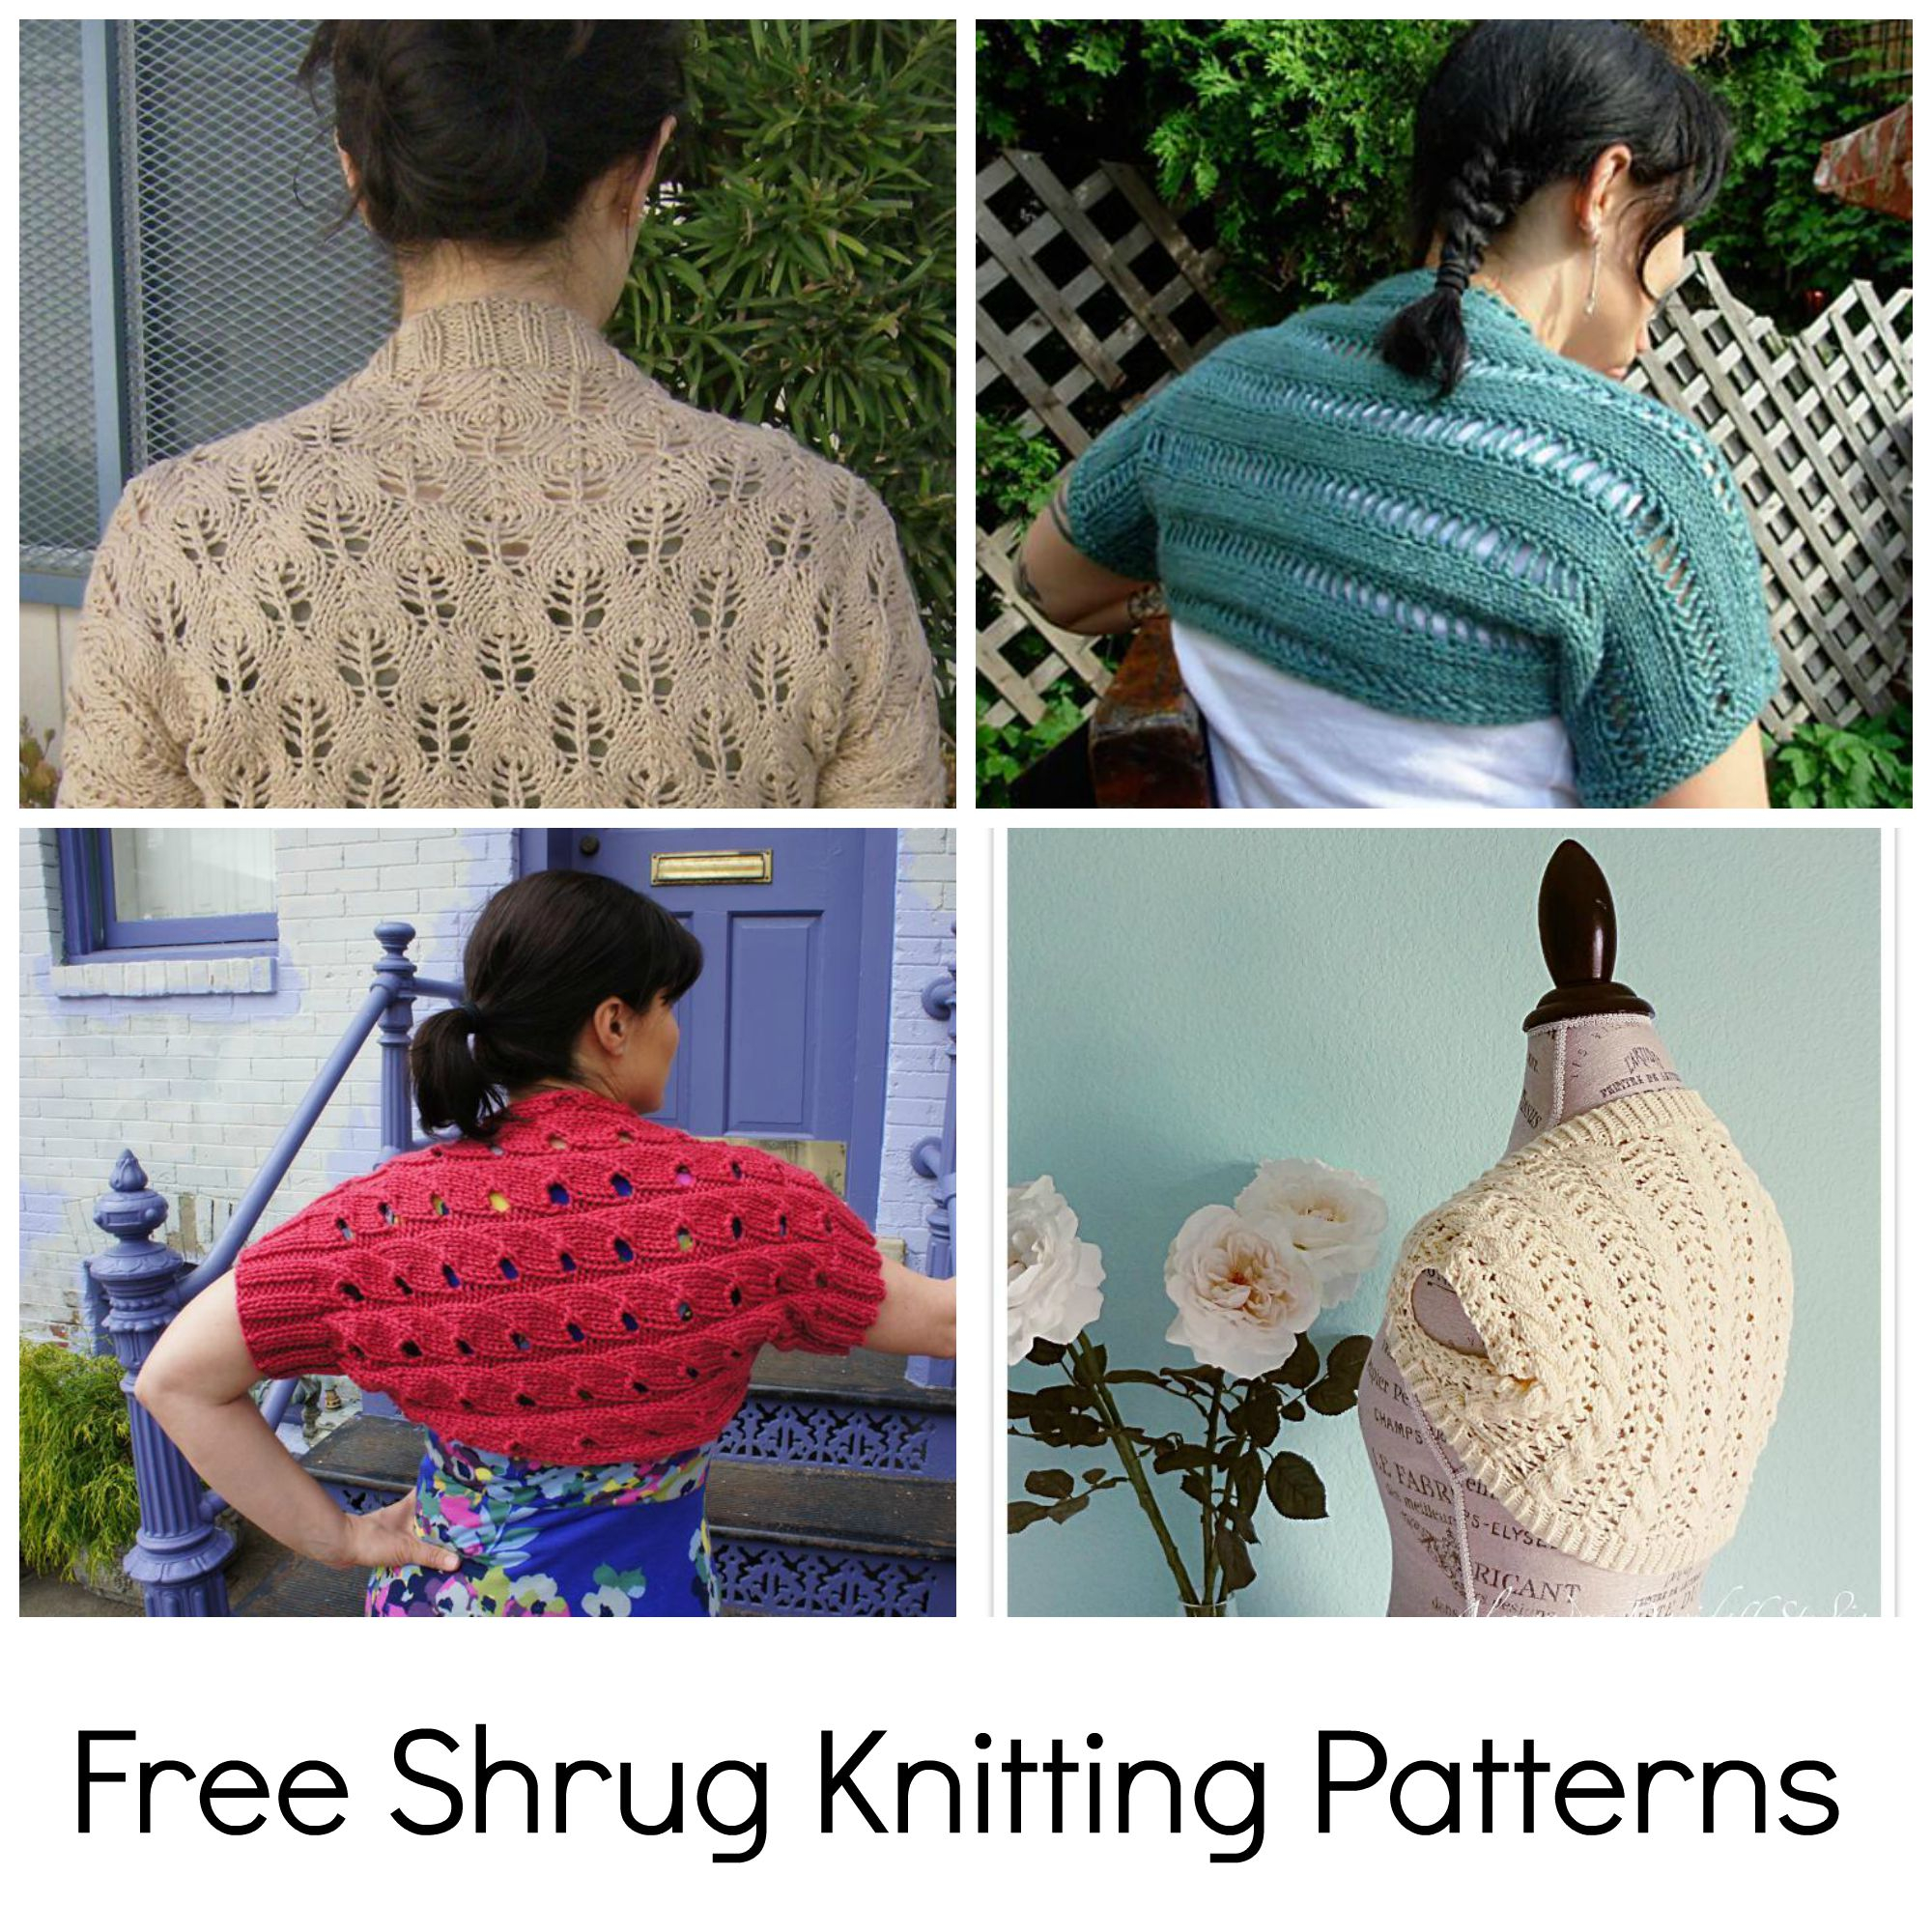 Free Crochet Lace Shrug Pattern Try A Free Shrug Knitting Pattern For Easy Layering